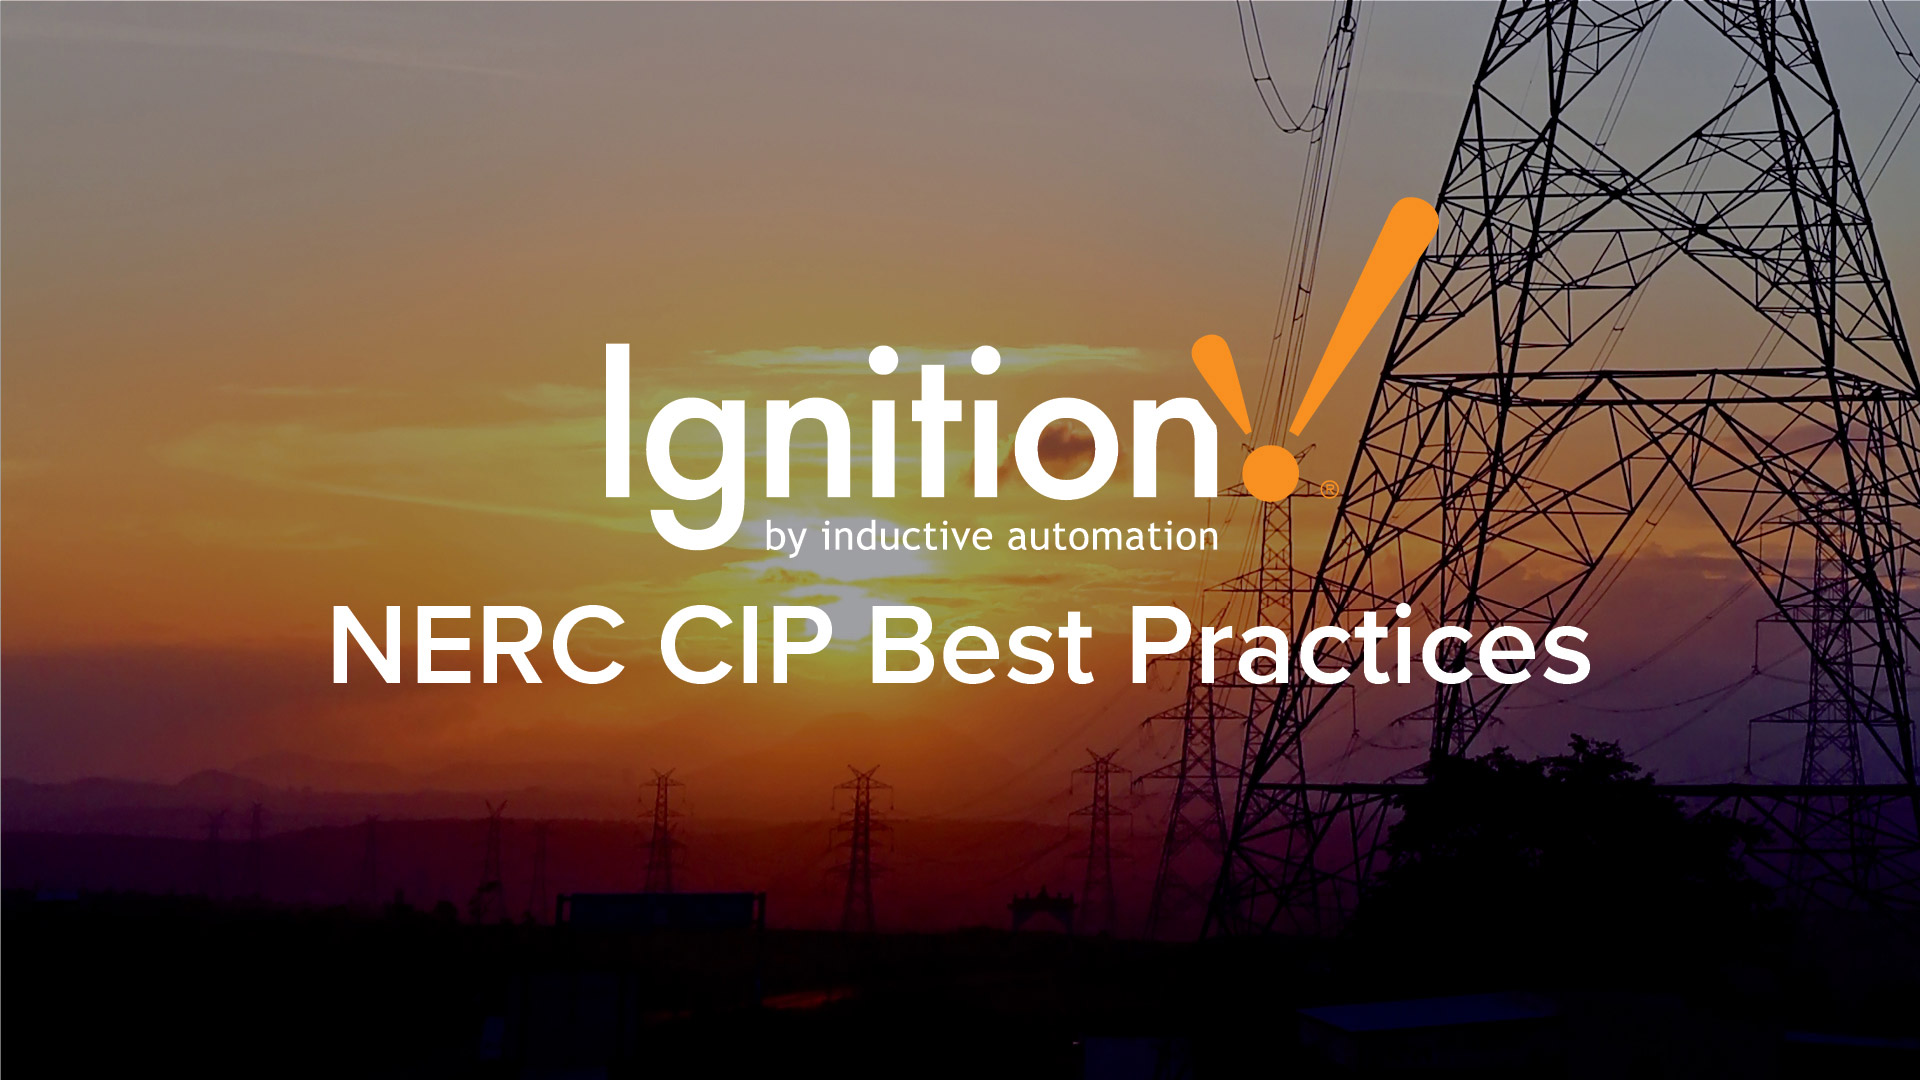 NERC CIP Best Practices with Inductive Automation and Ignition